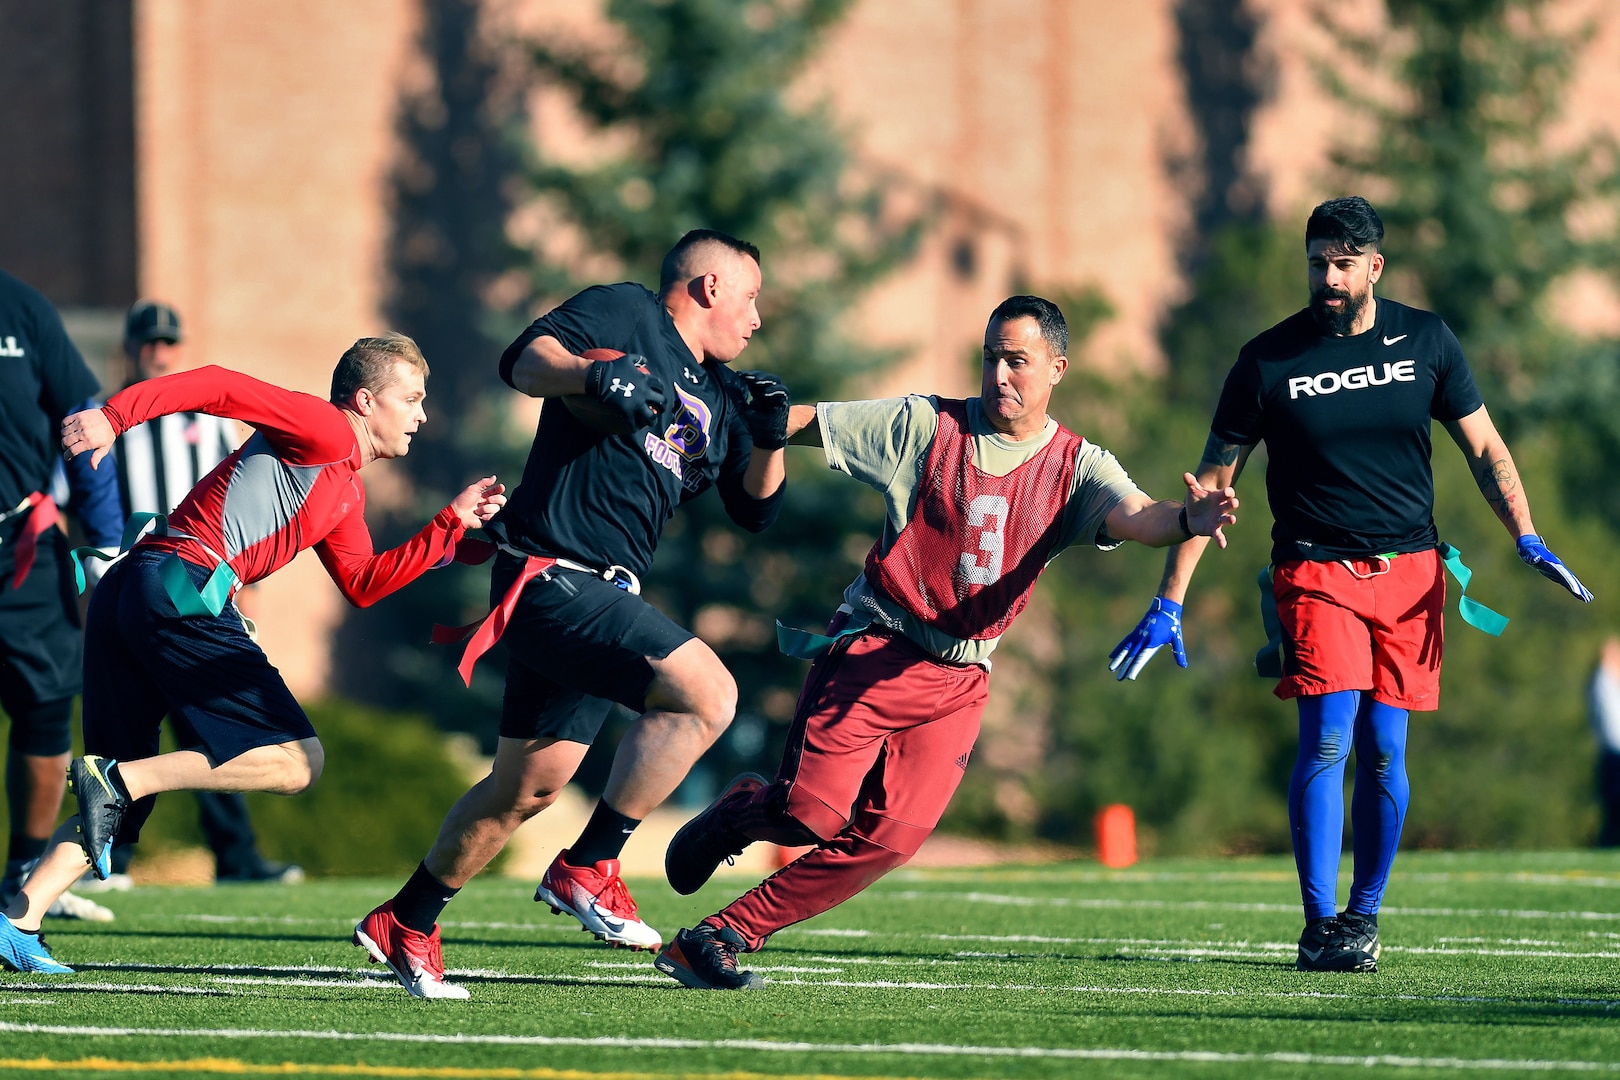 U.S. Space Command and Joint Task Force-Space Defense team members play flag football during inaugural Space Turkey Bowl.